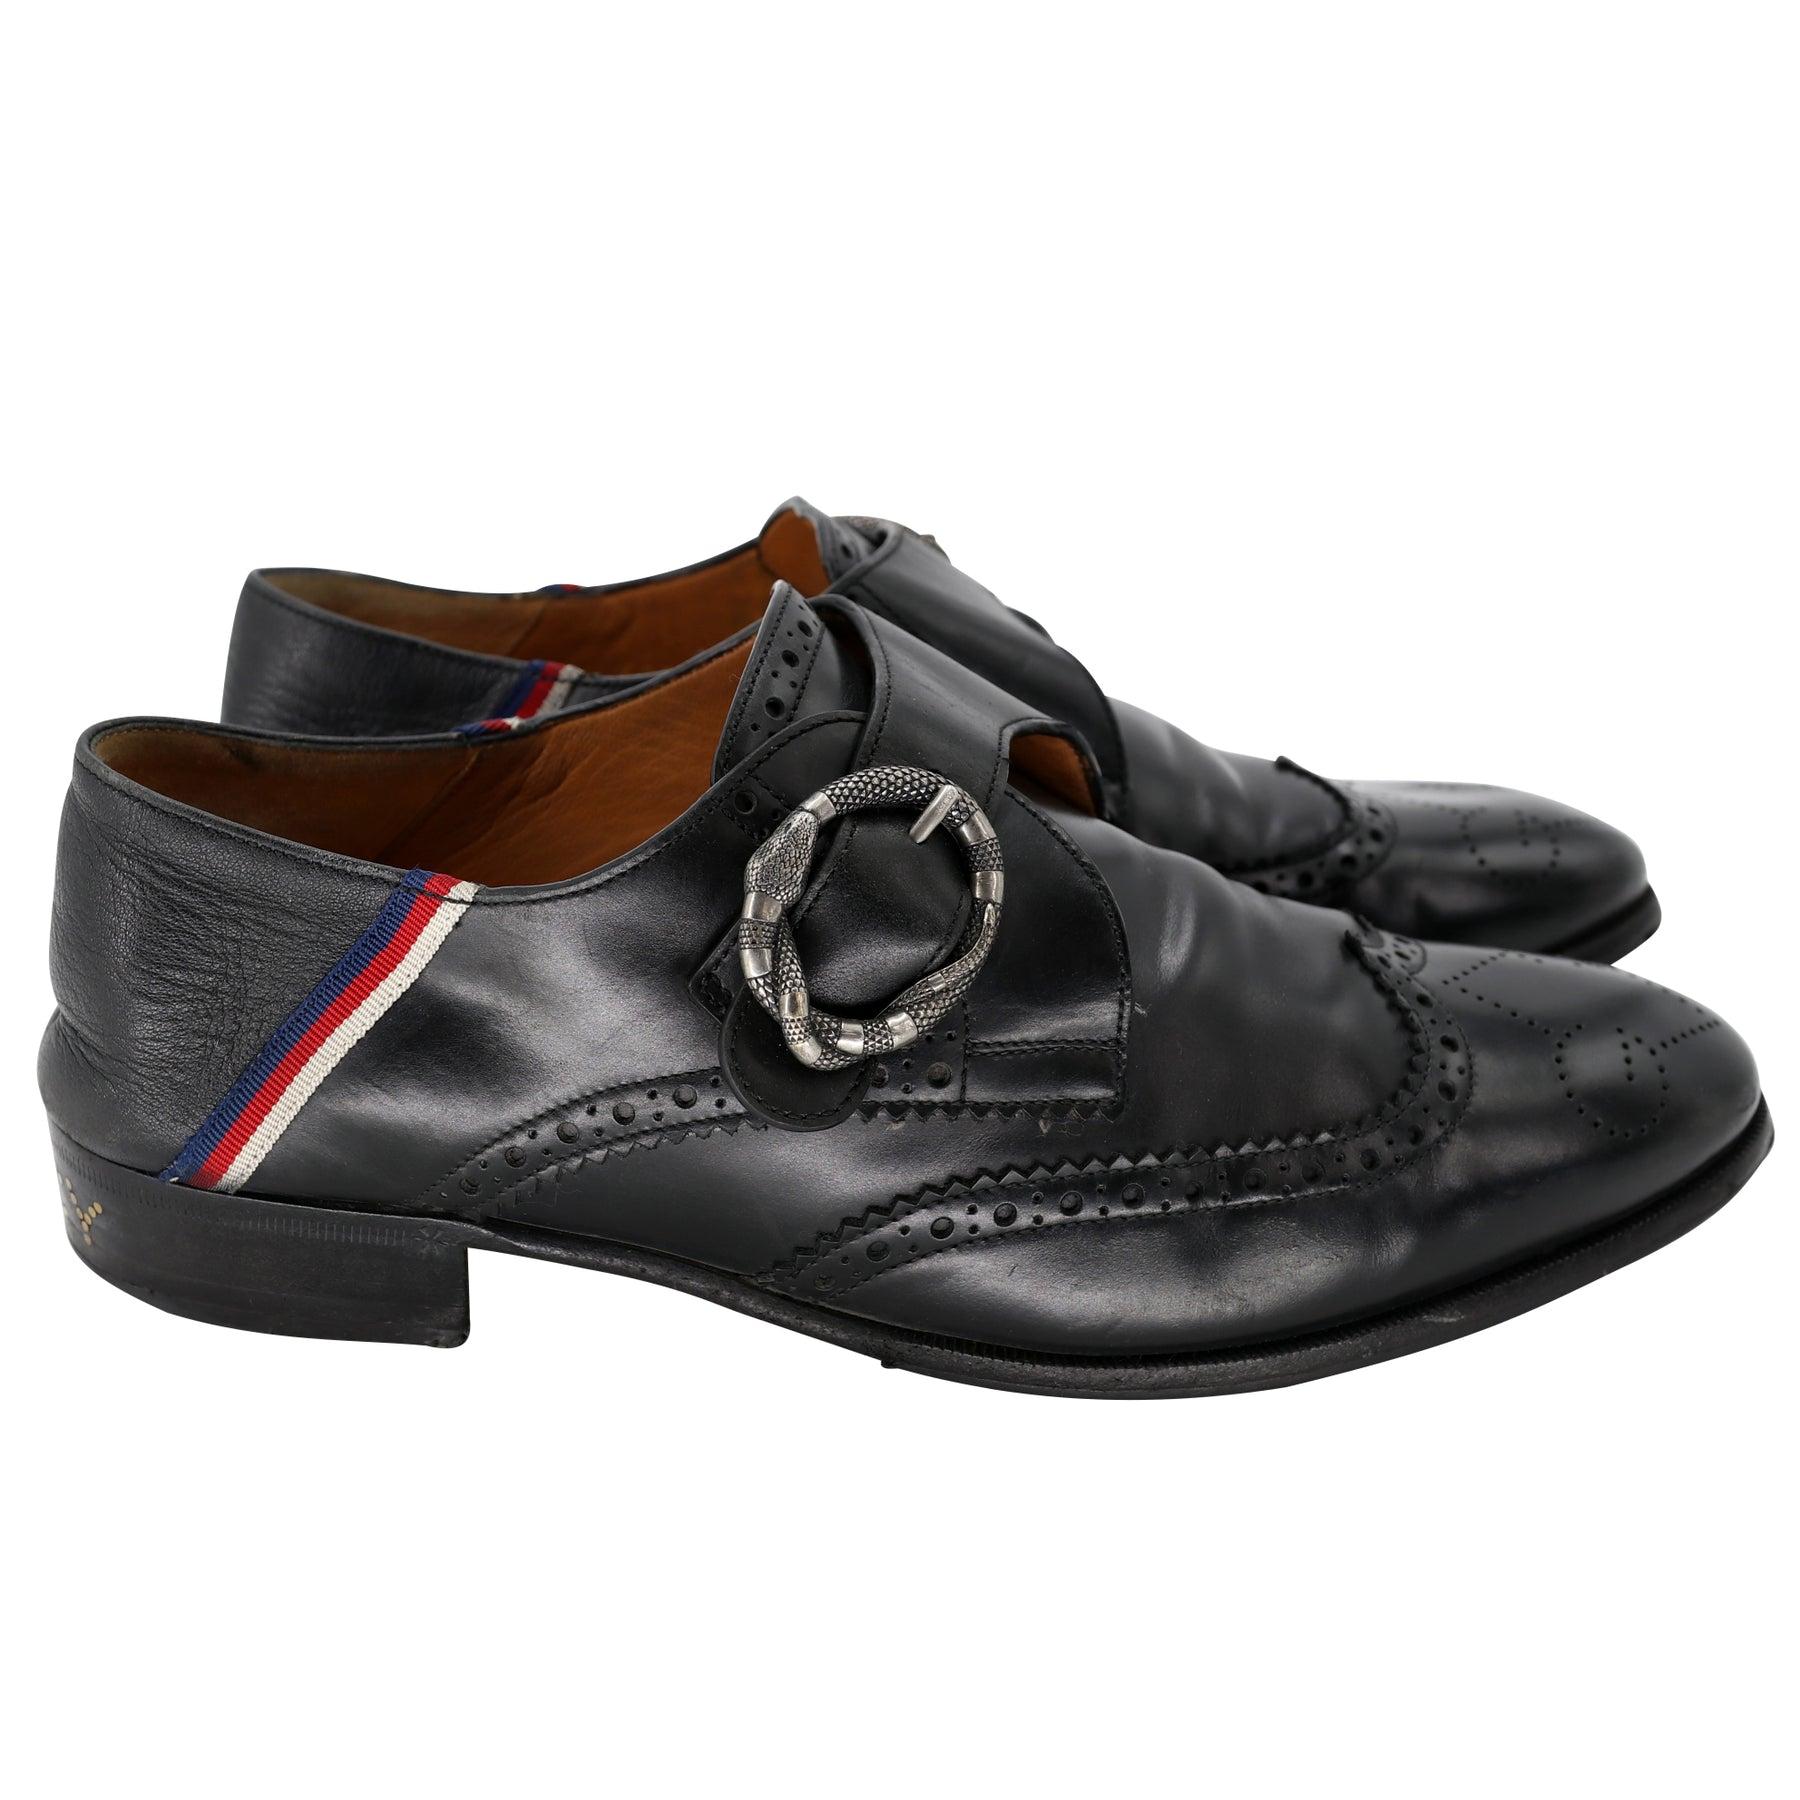 gucci buckle loafers